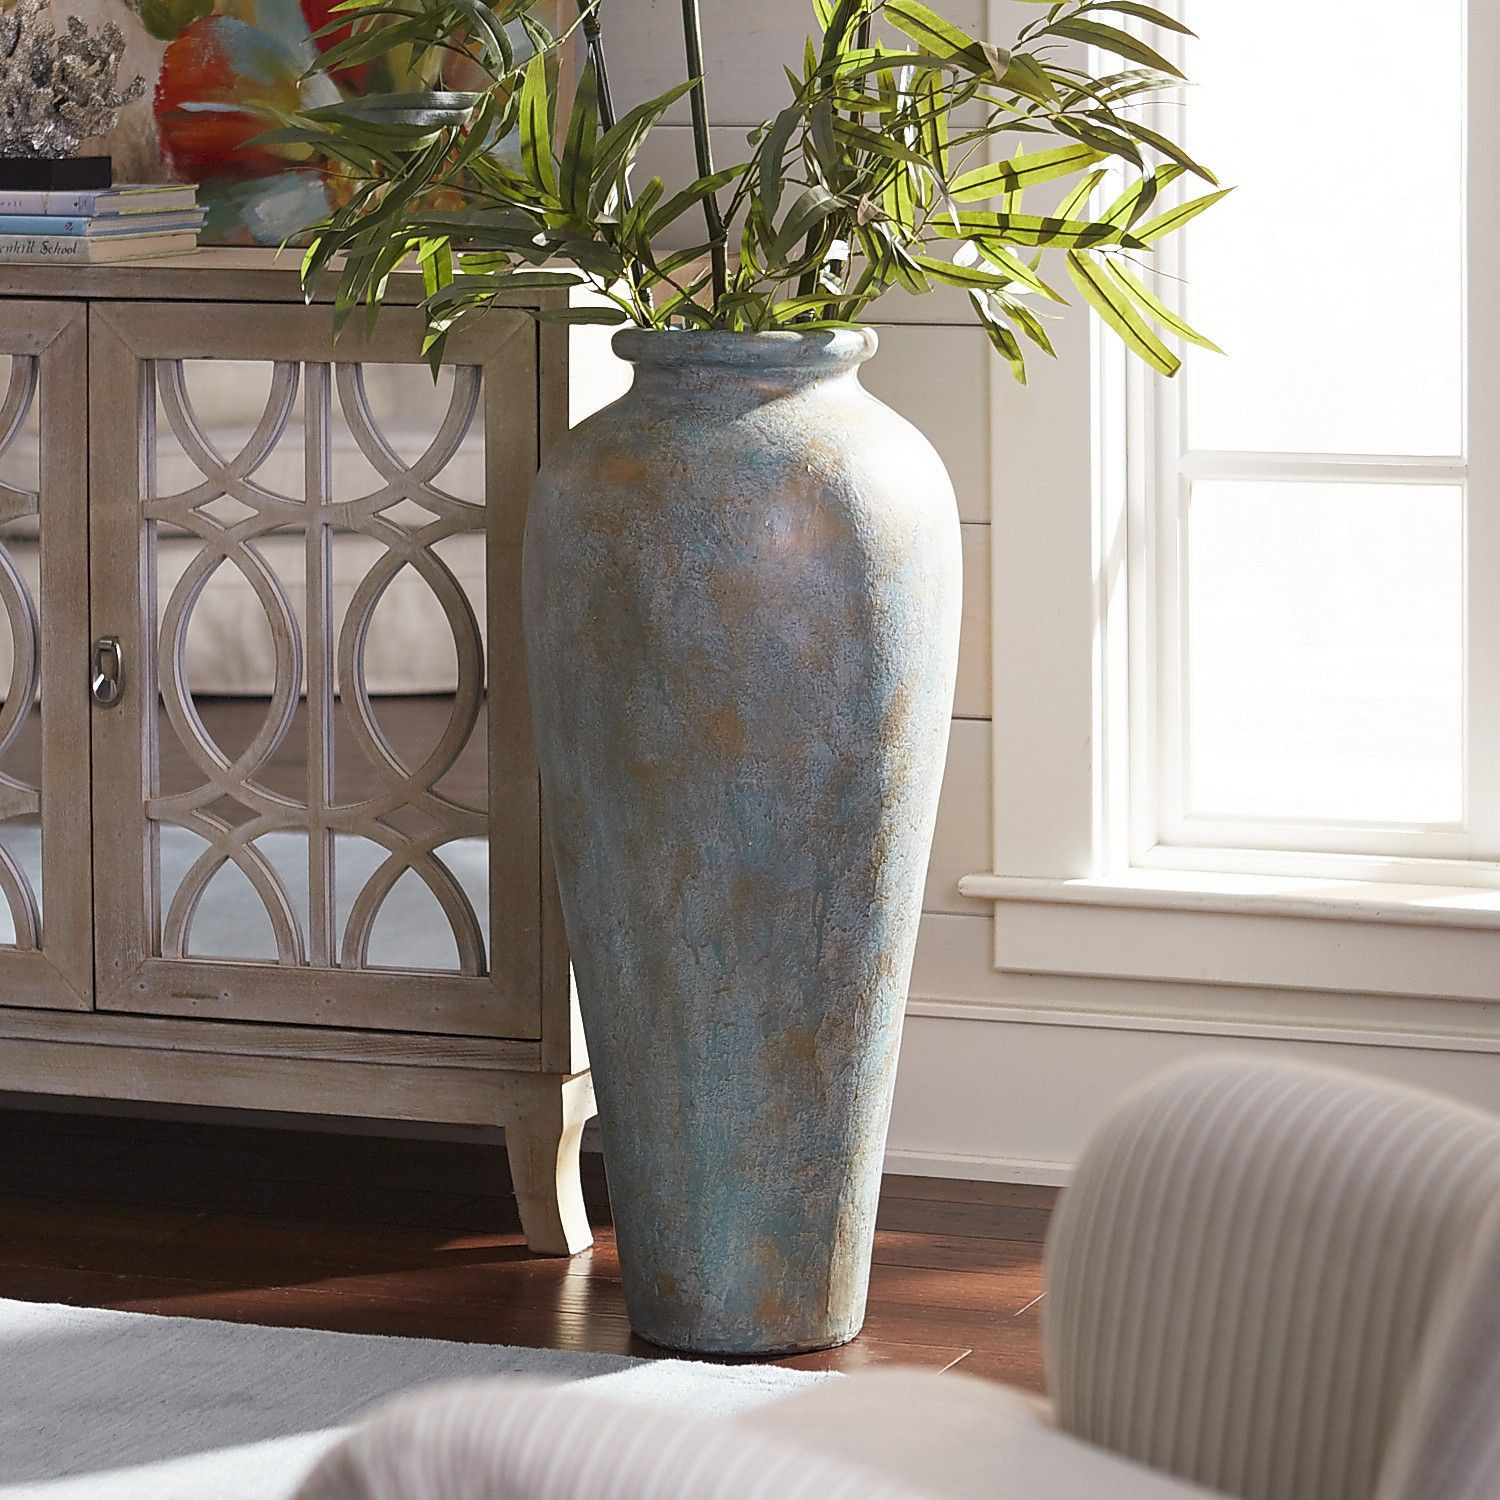 18 Unique Tall Rustic Vase 2024 free download tall rustic vase of rustic floor vase collection 9 beautiful floor vases qosy for tall within rustic floor vase collection blue green patina urn floor vase products pinterest of rustic floor